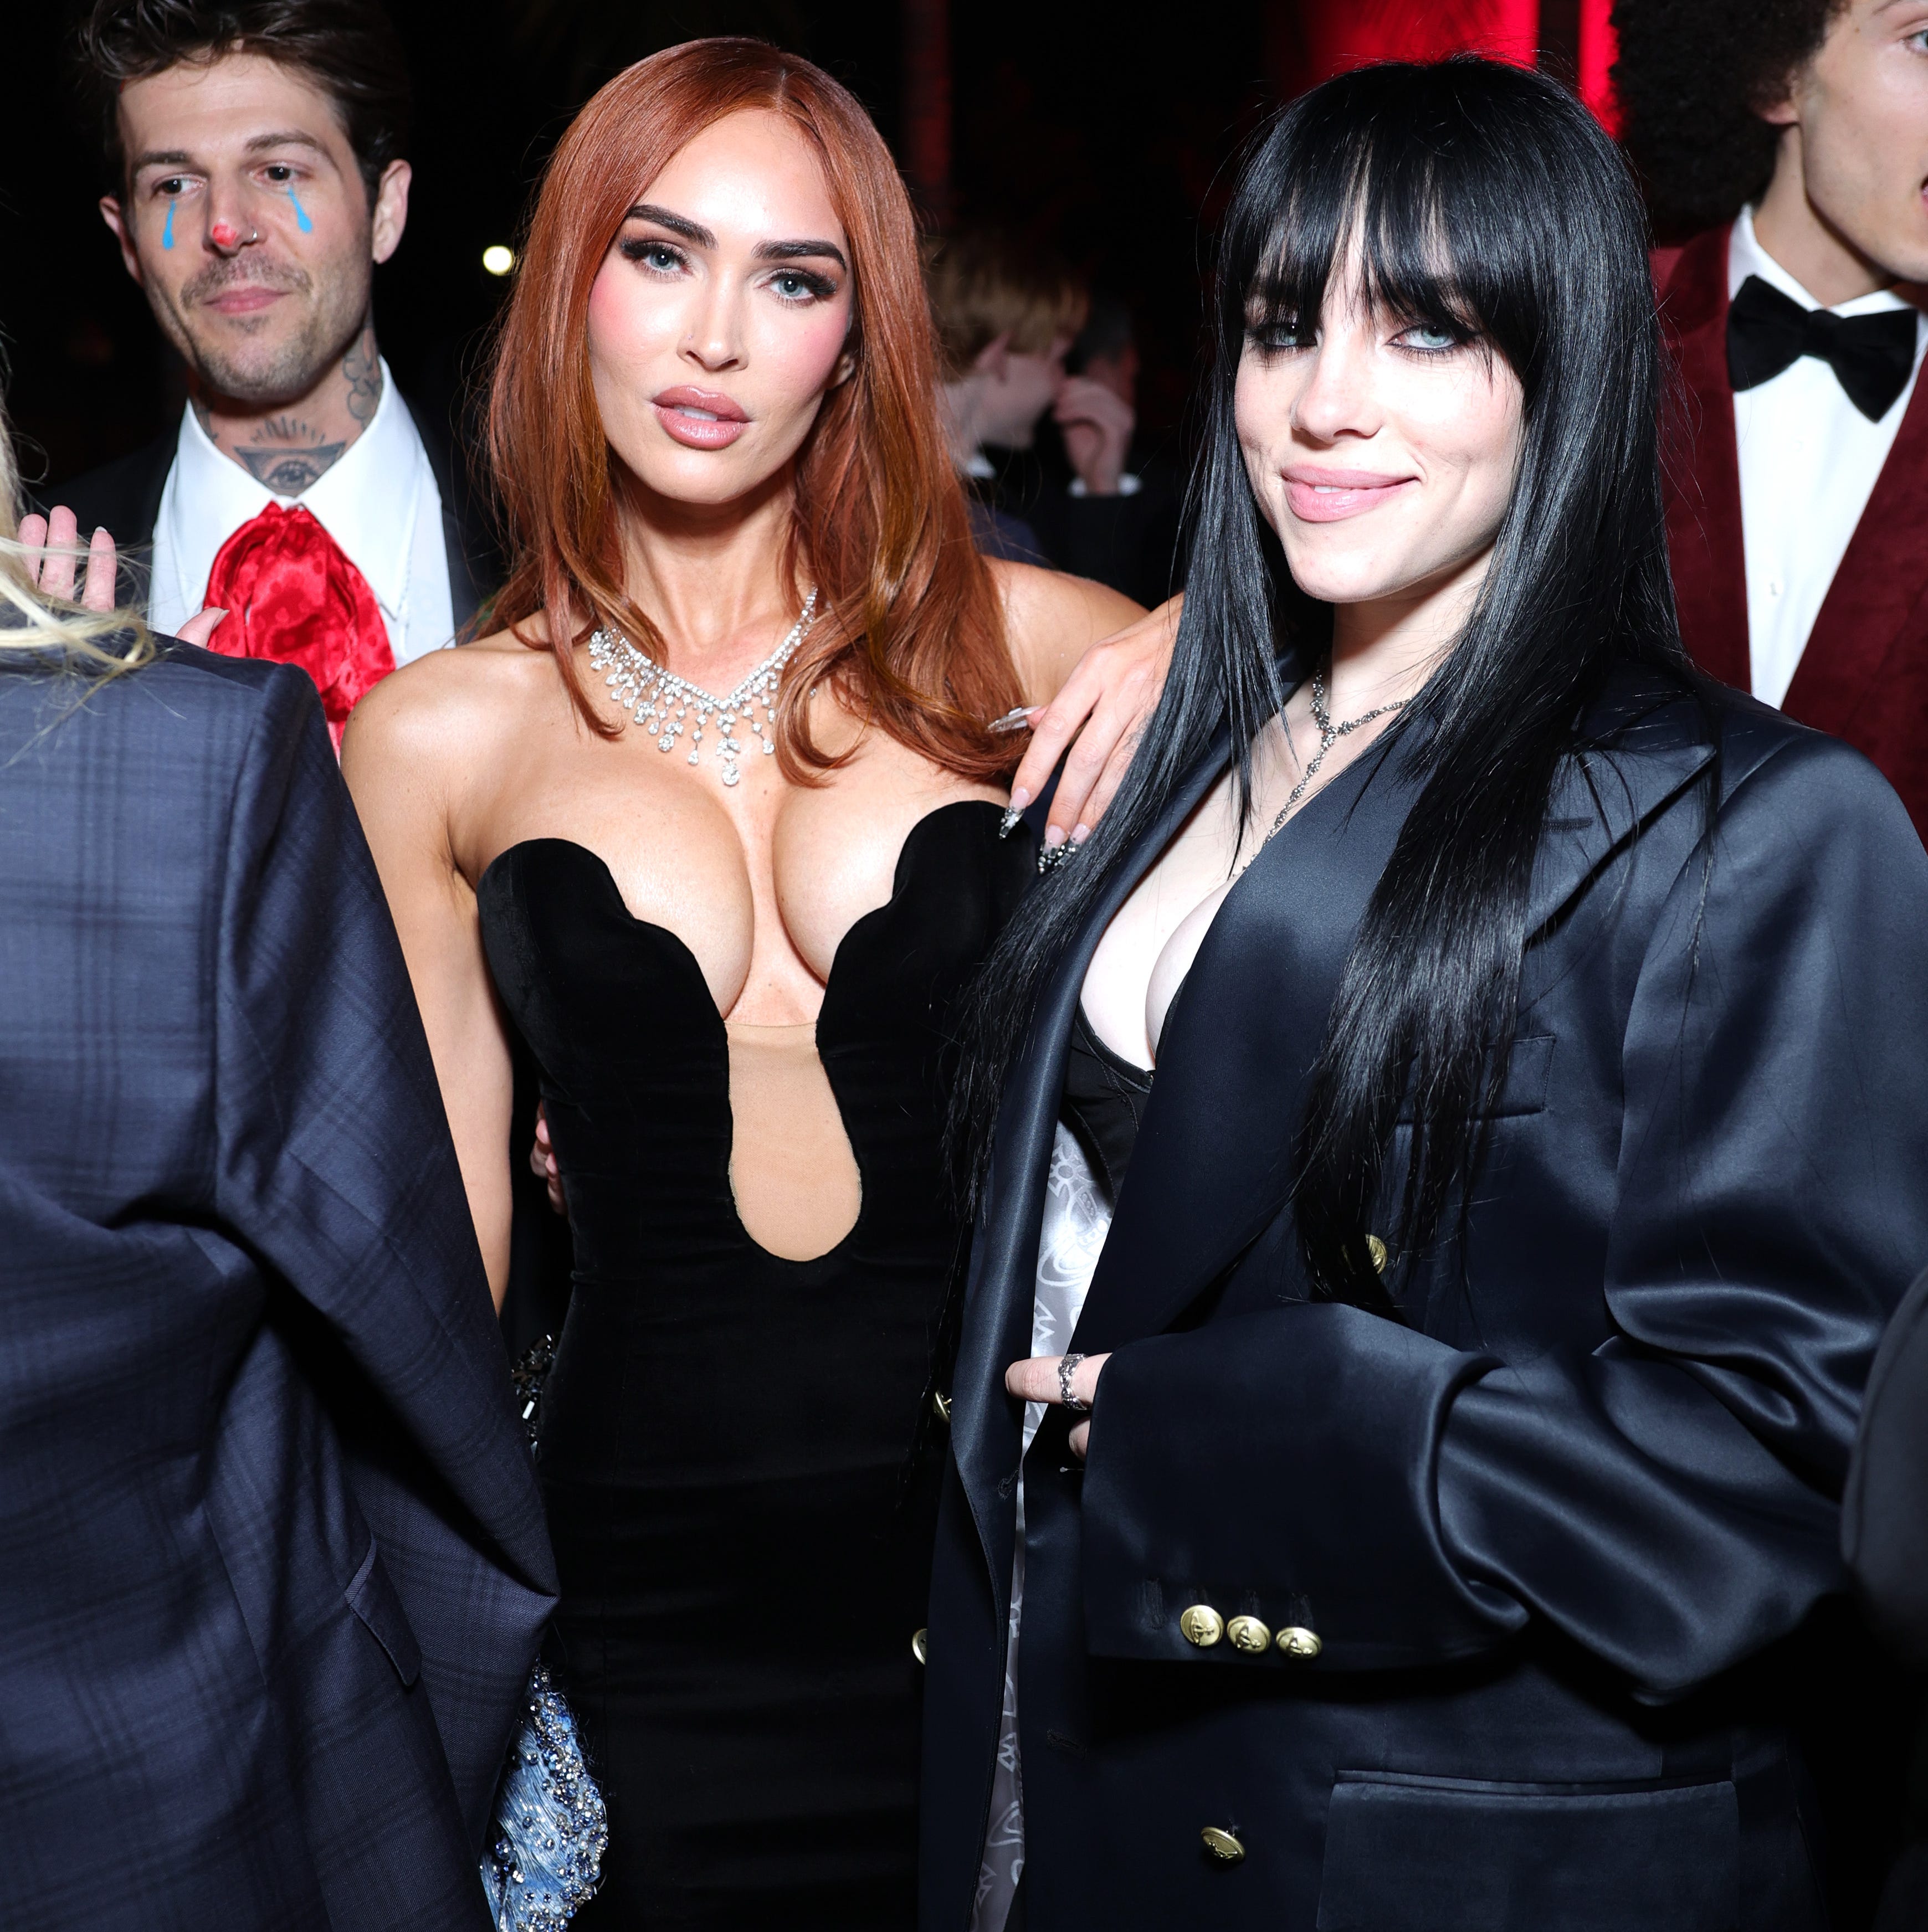 Megan Fox Partied in a Couture Velvet Dress with a Plunging Neckline